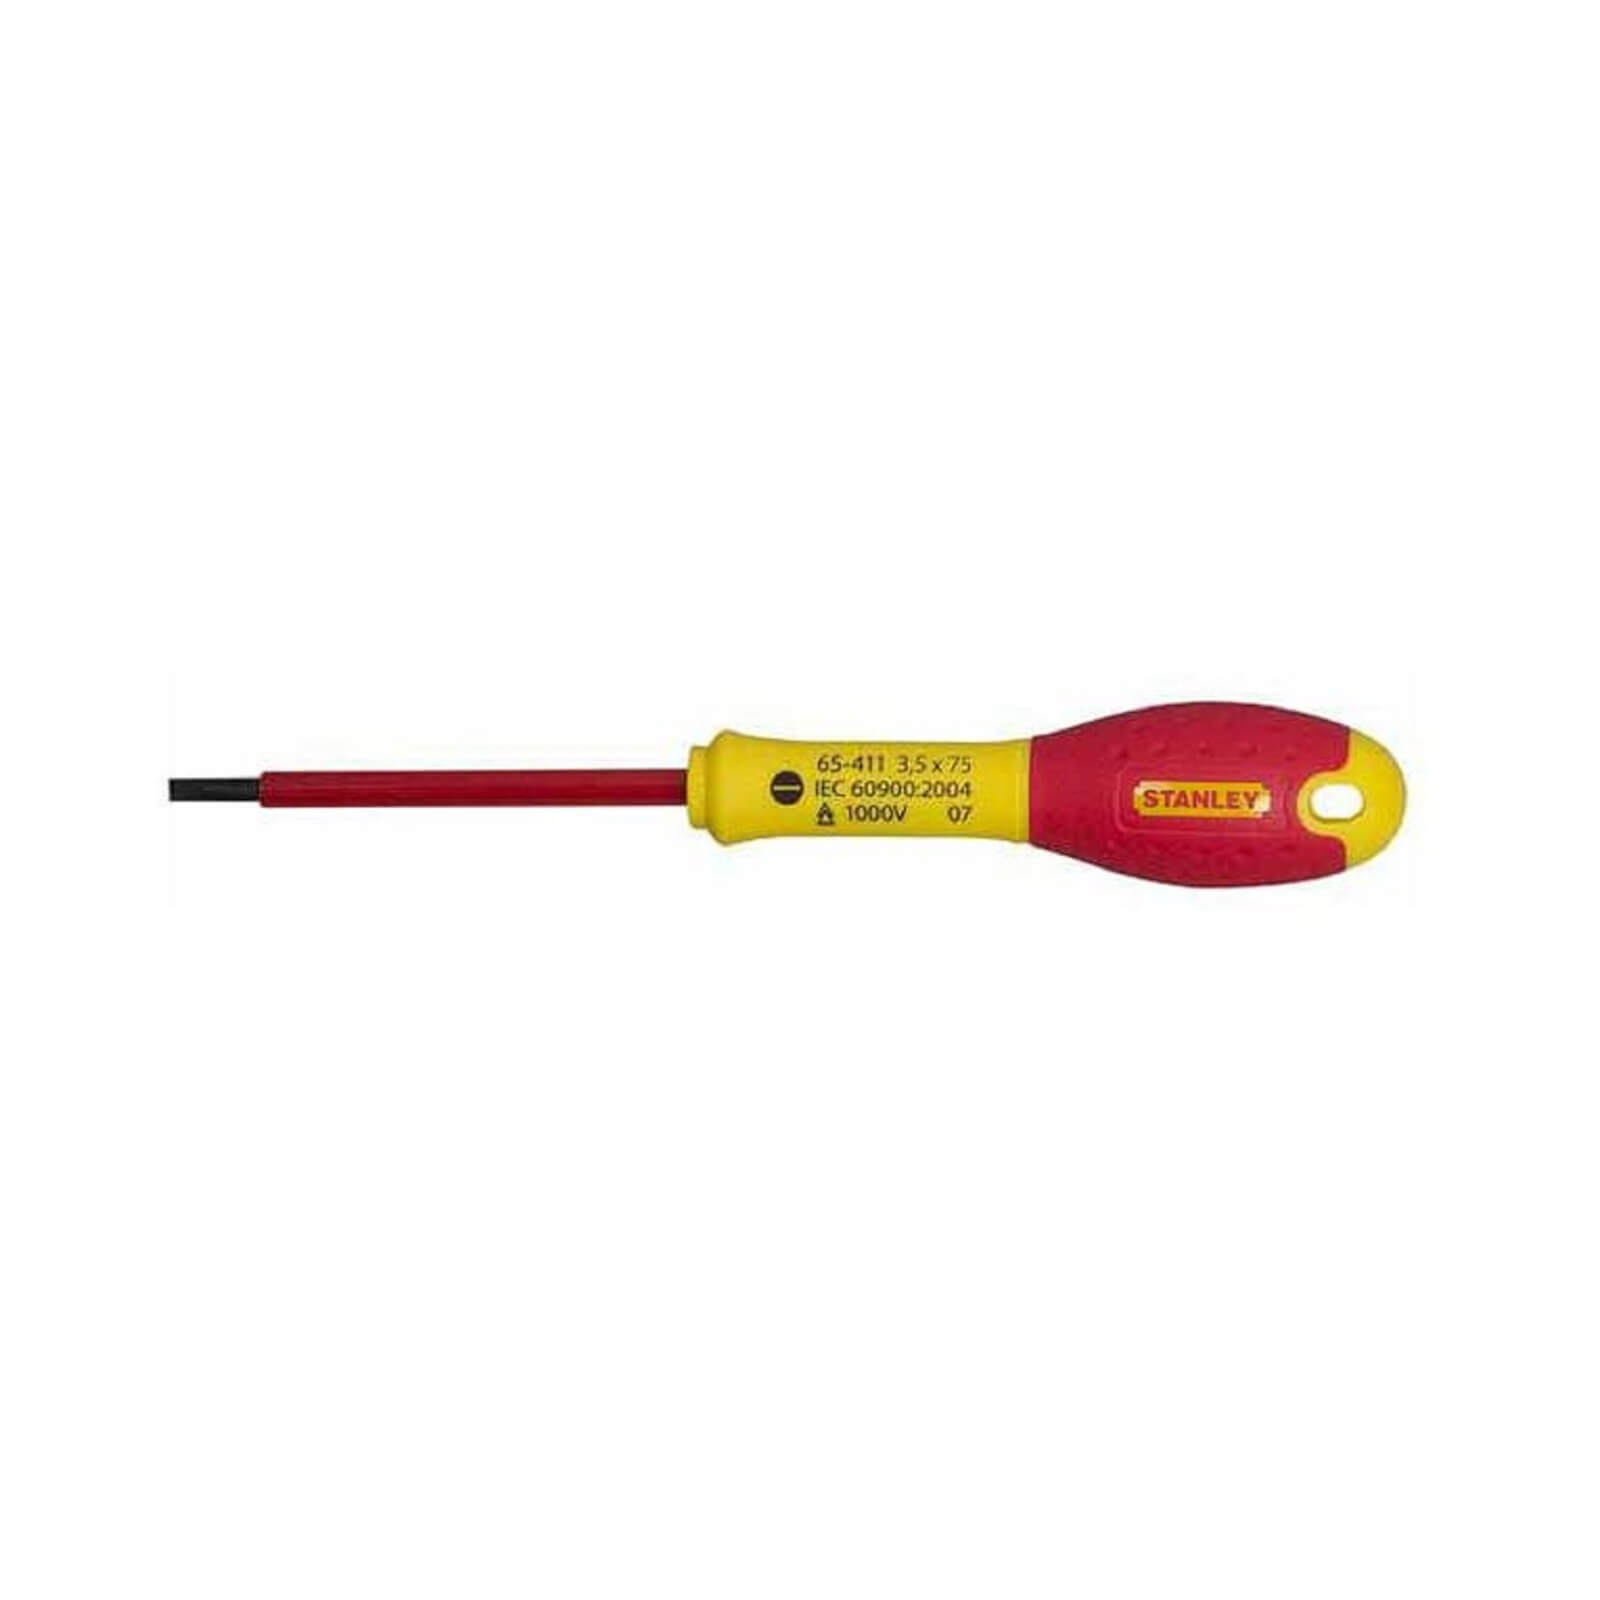 Stanley Fatmax Slotted Insulated Screwdriver - 3.5x75mm